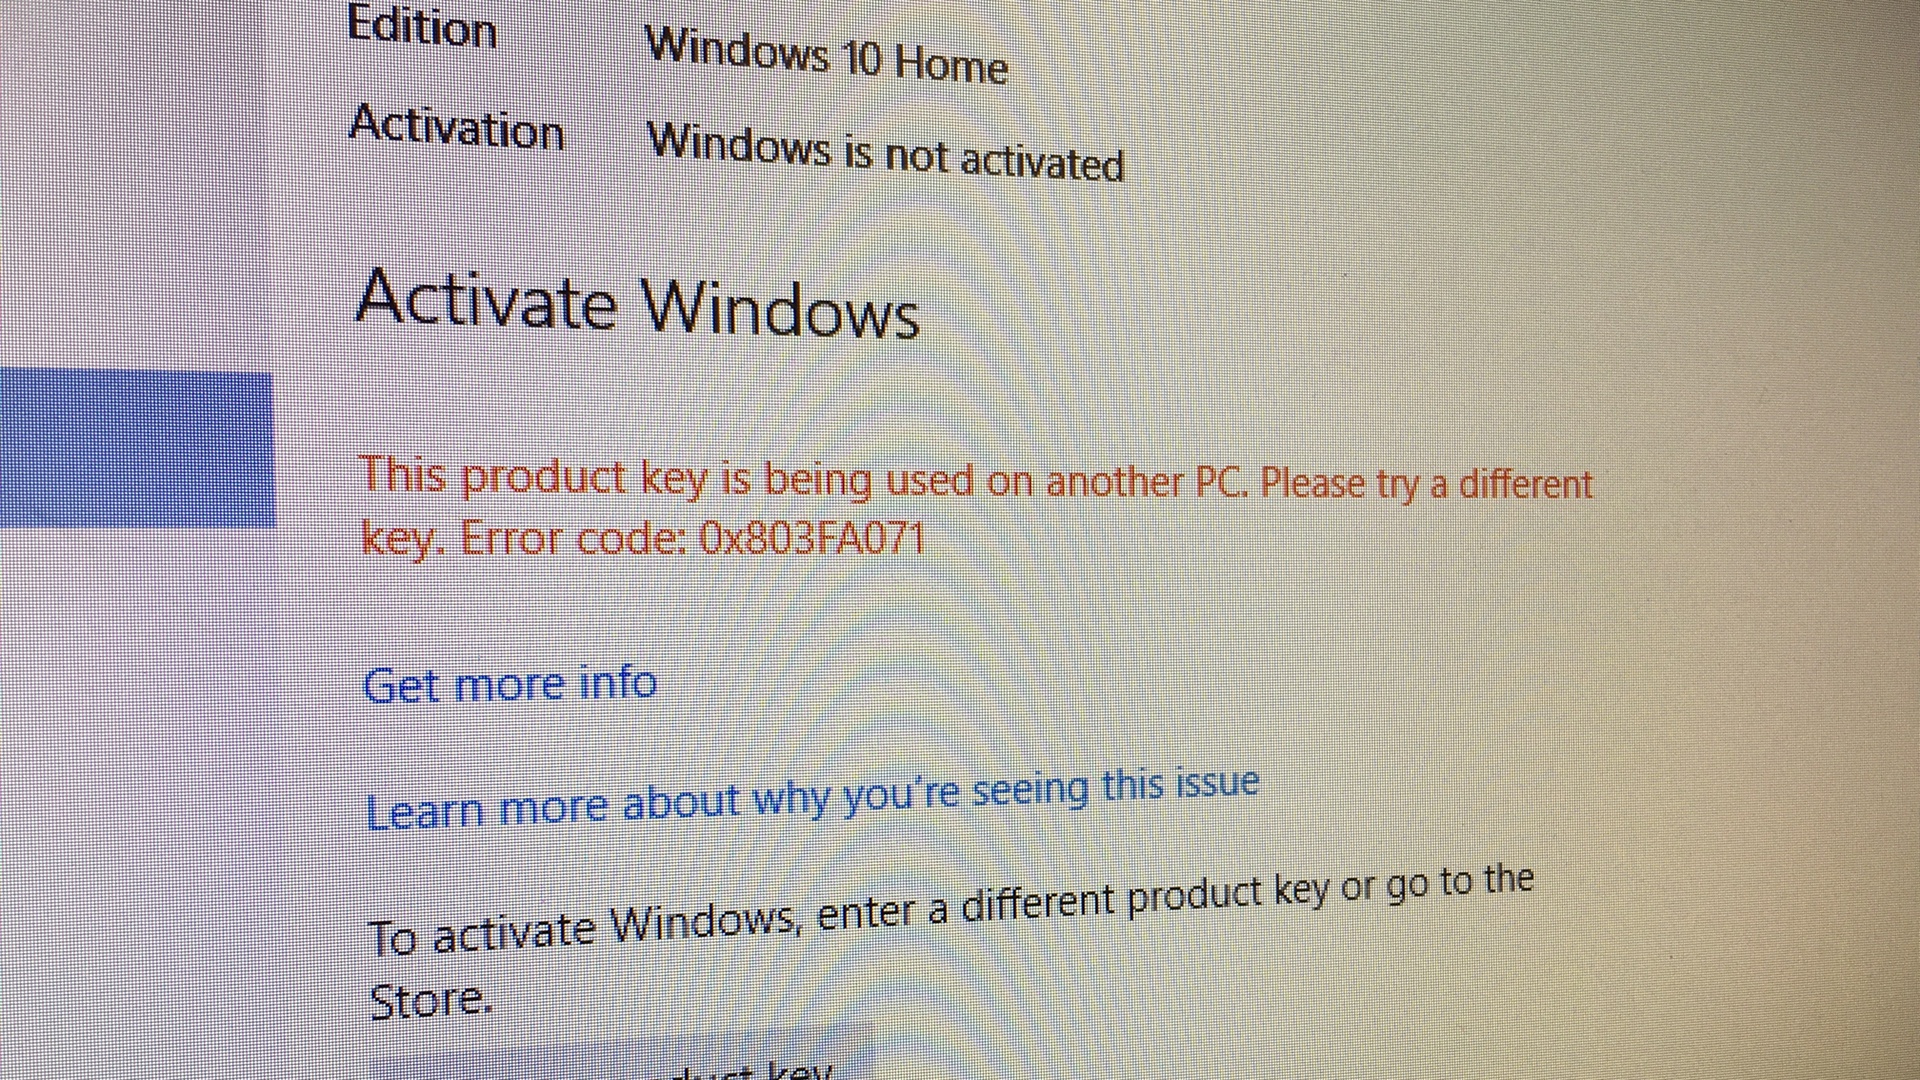 Windows 10 is not activated